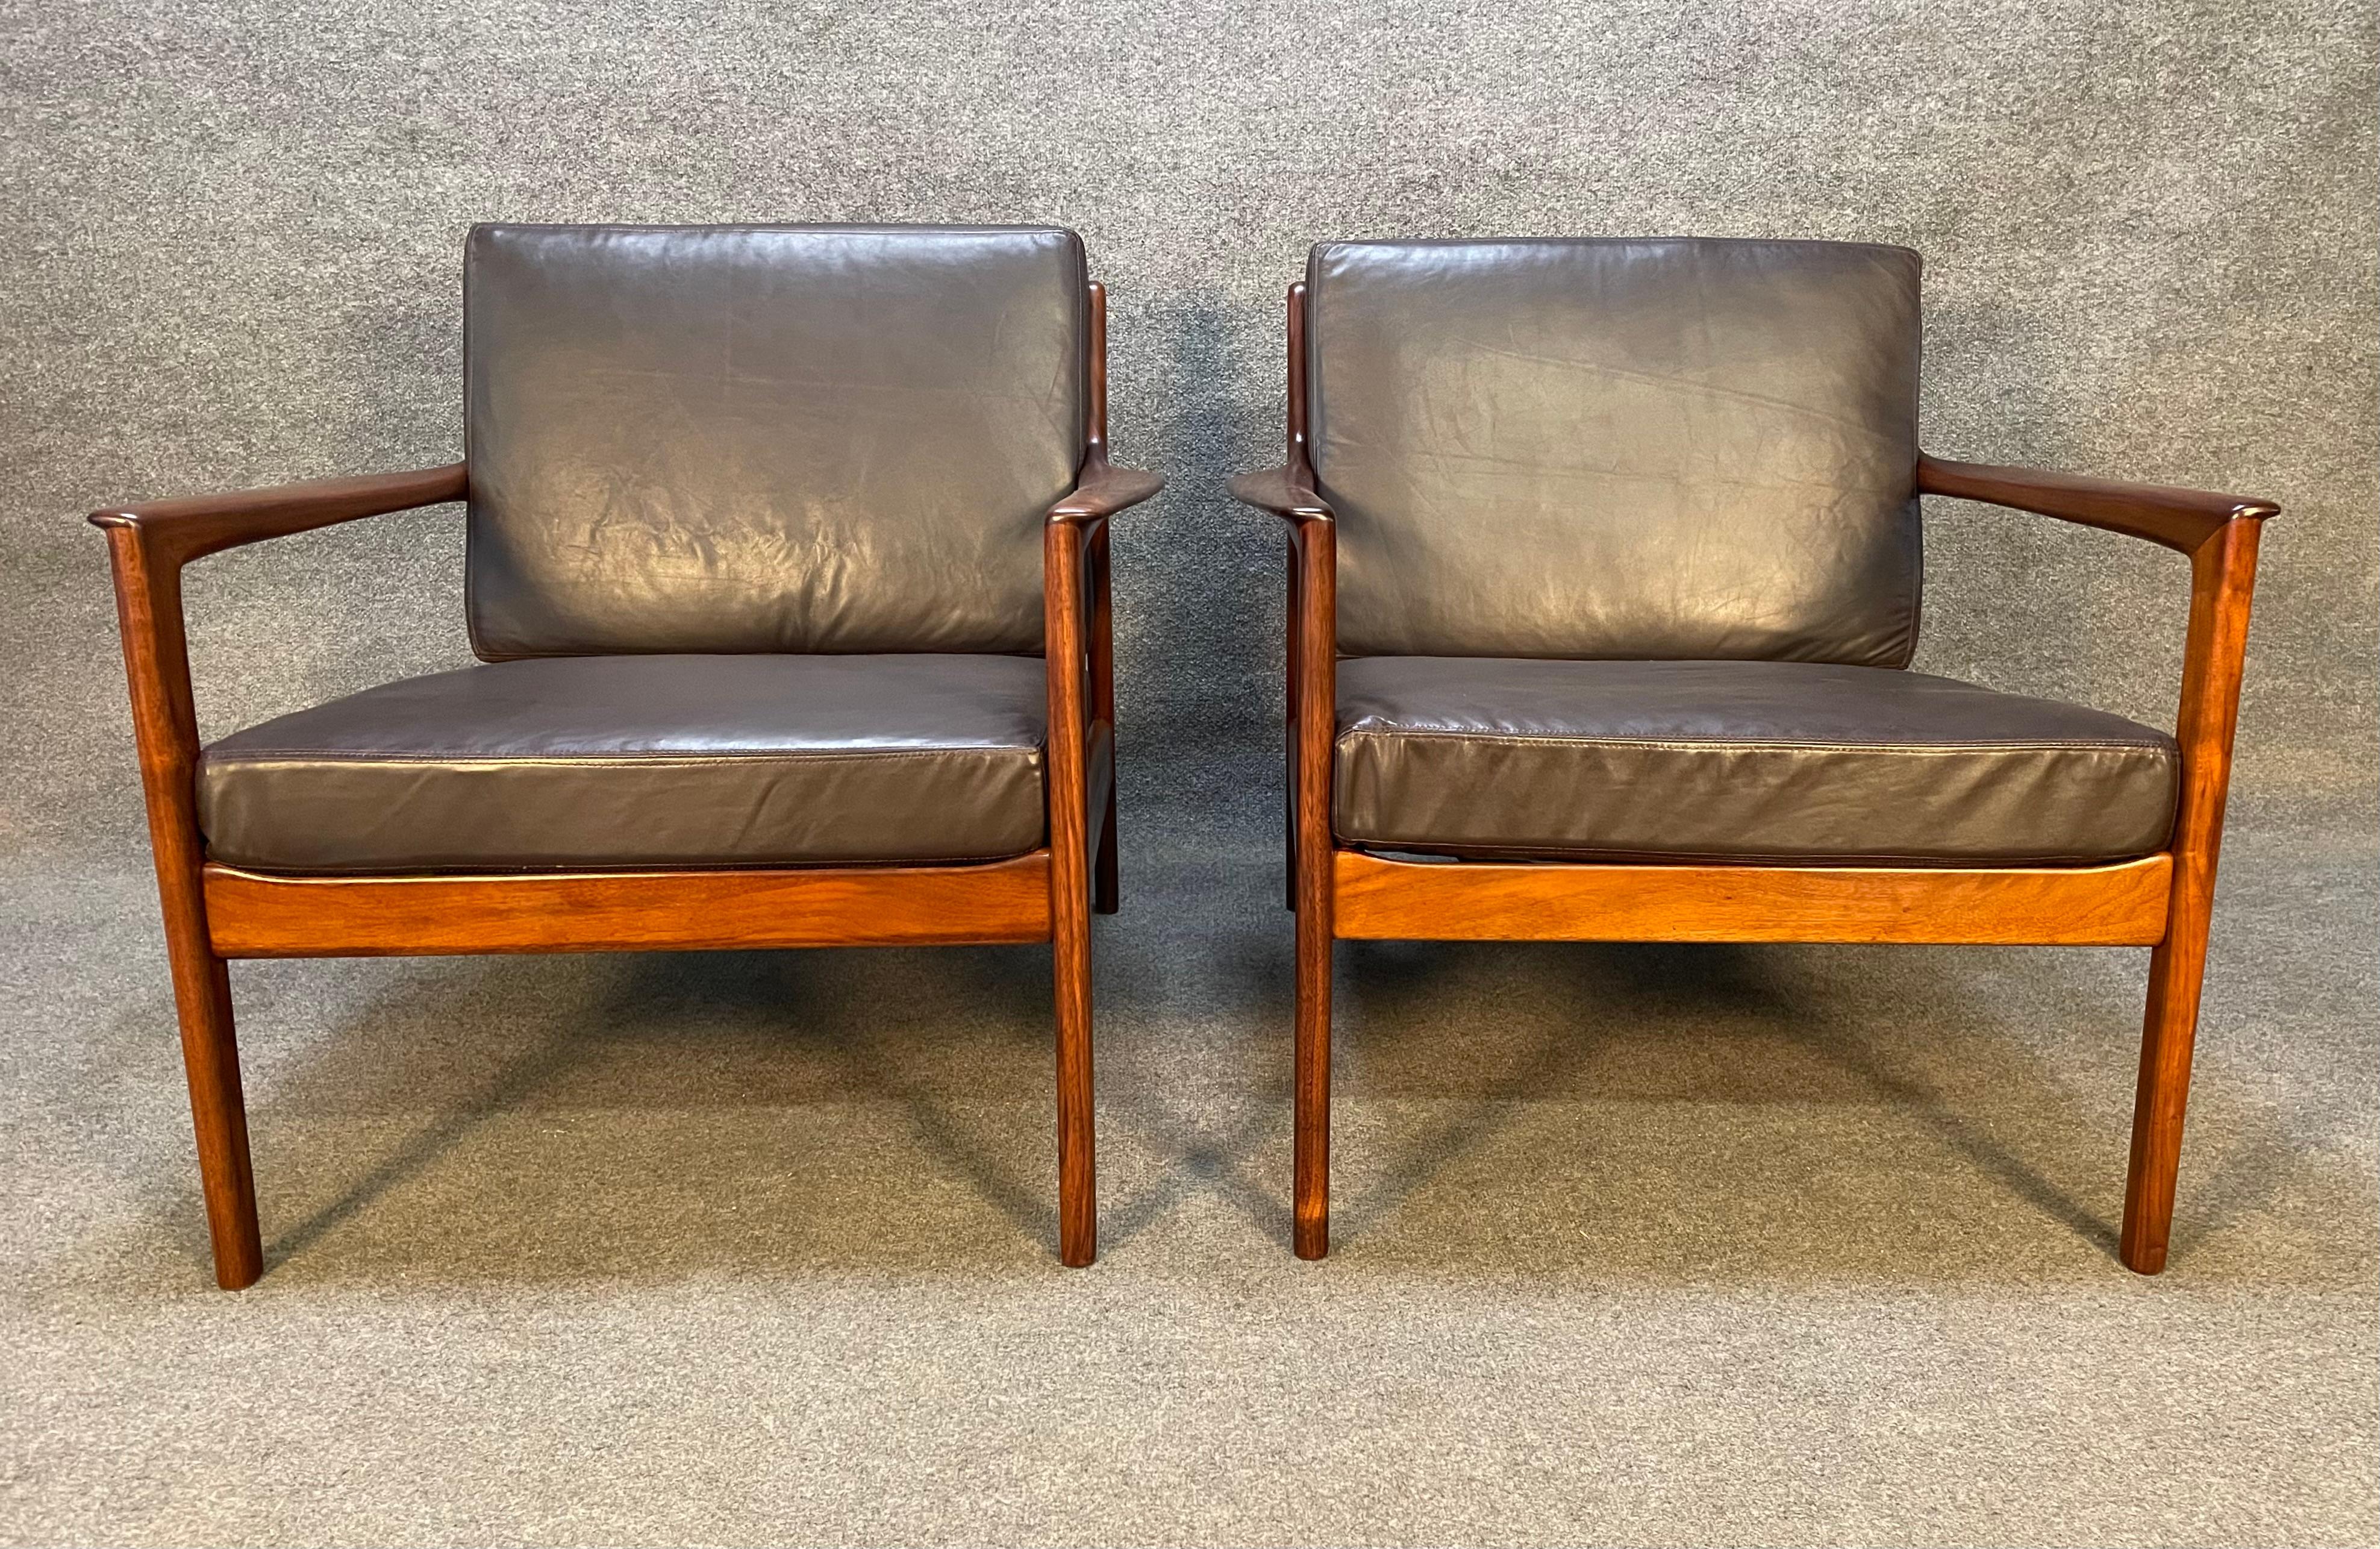 Here is a rare set of two scandinavian modern easy chairs model 